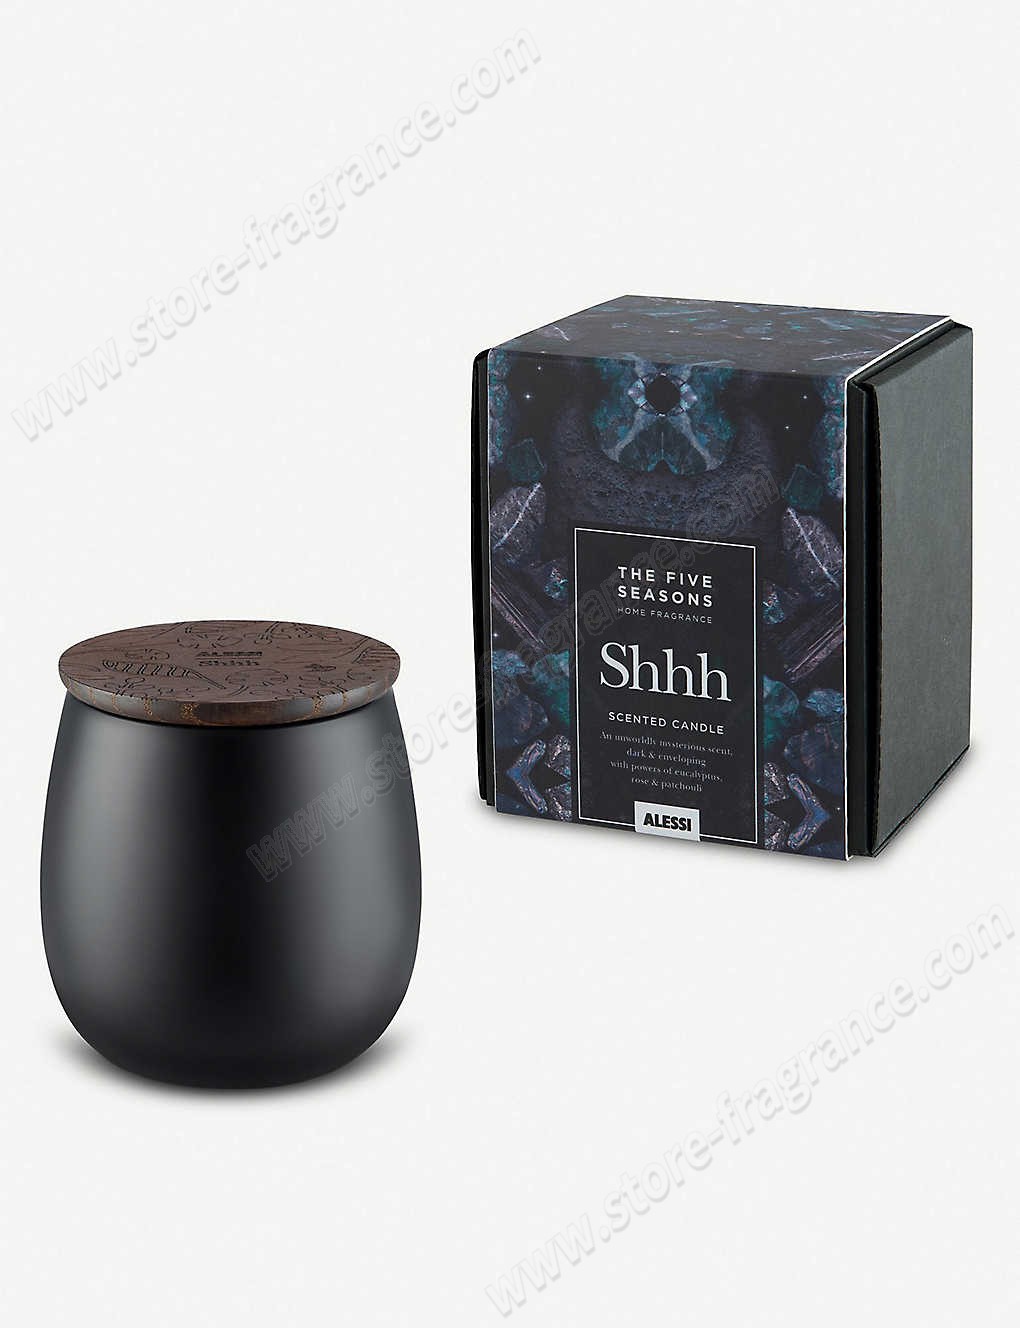 ALESSI/Five Seasons Shhh Scented candle small ✿ Discount Store - ALESSI/Five Seasons Shhh Scented candle small ✿ Discount Store